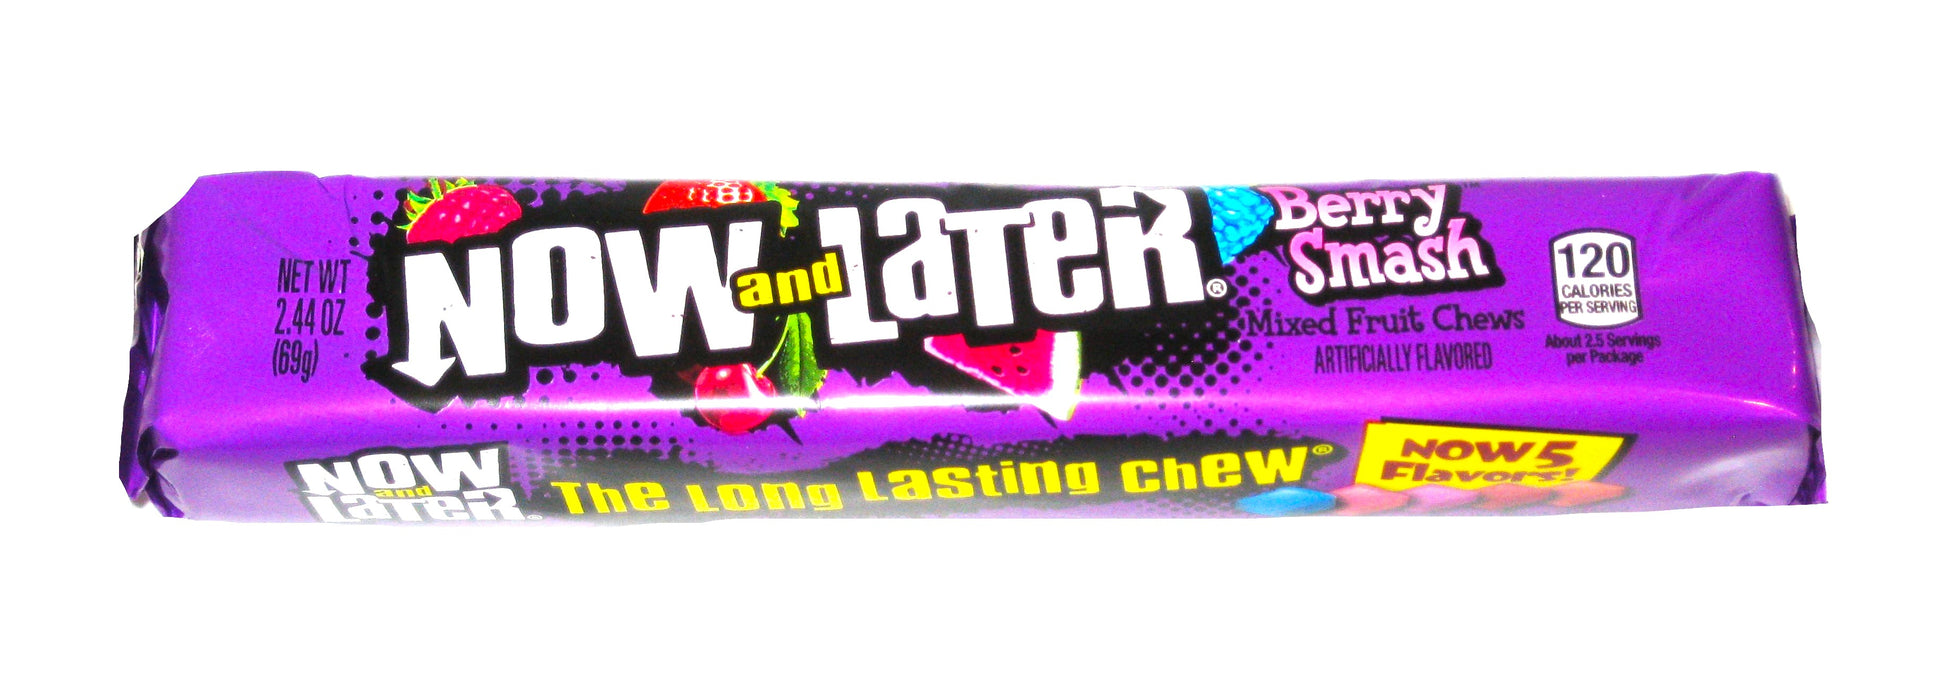 Now and Later Berry Smash 2.44oz Bar